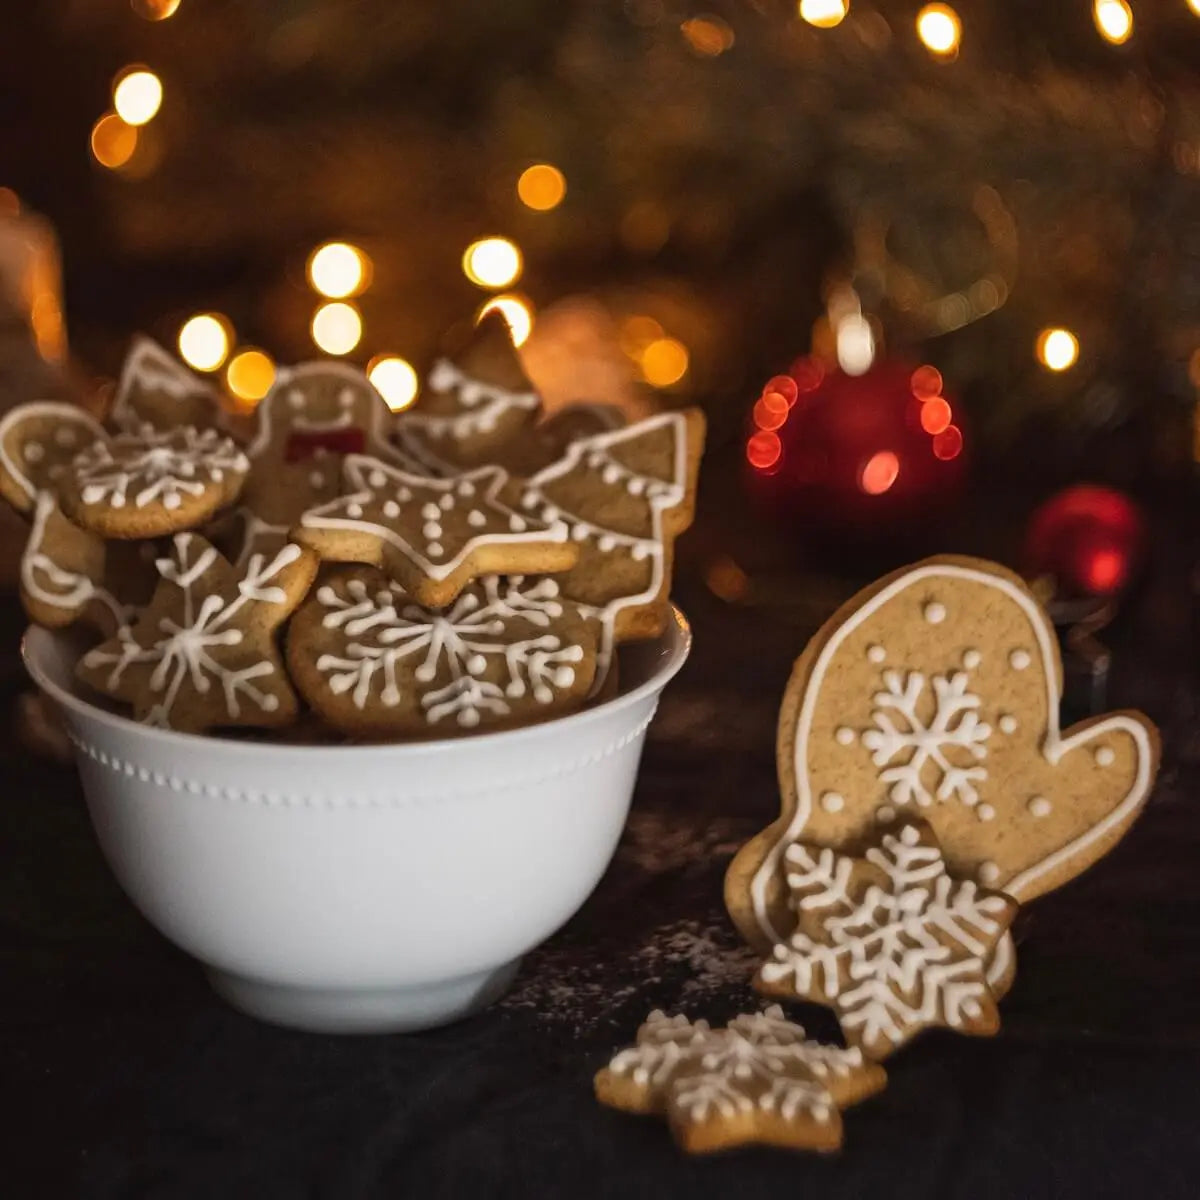 A white bowl of homemade gingerbread against the background of a blurred Christmas tree with lights